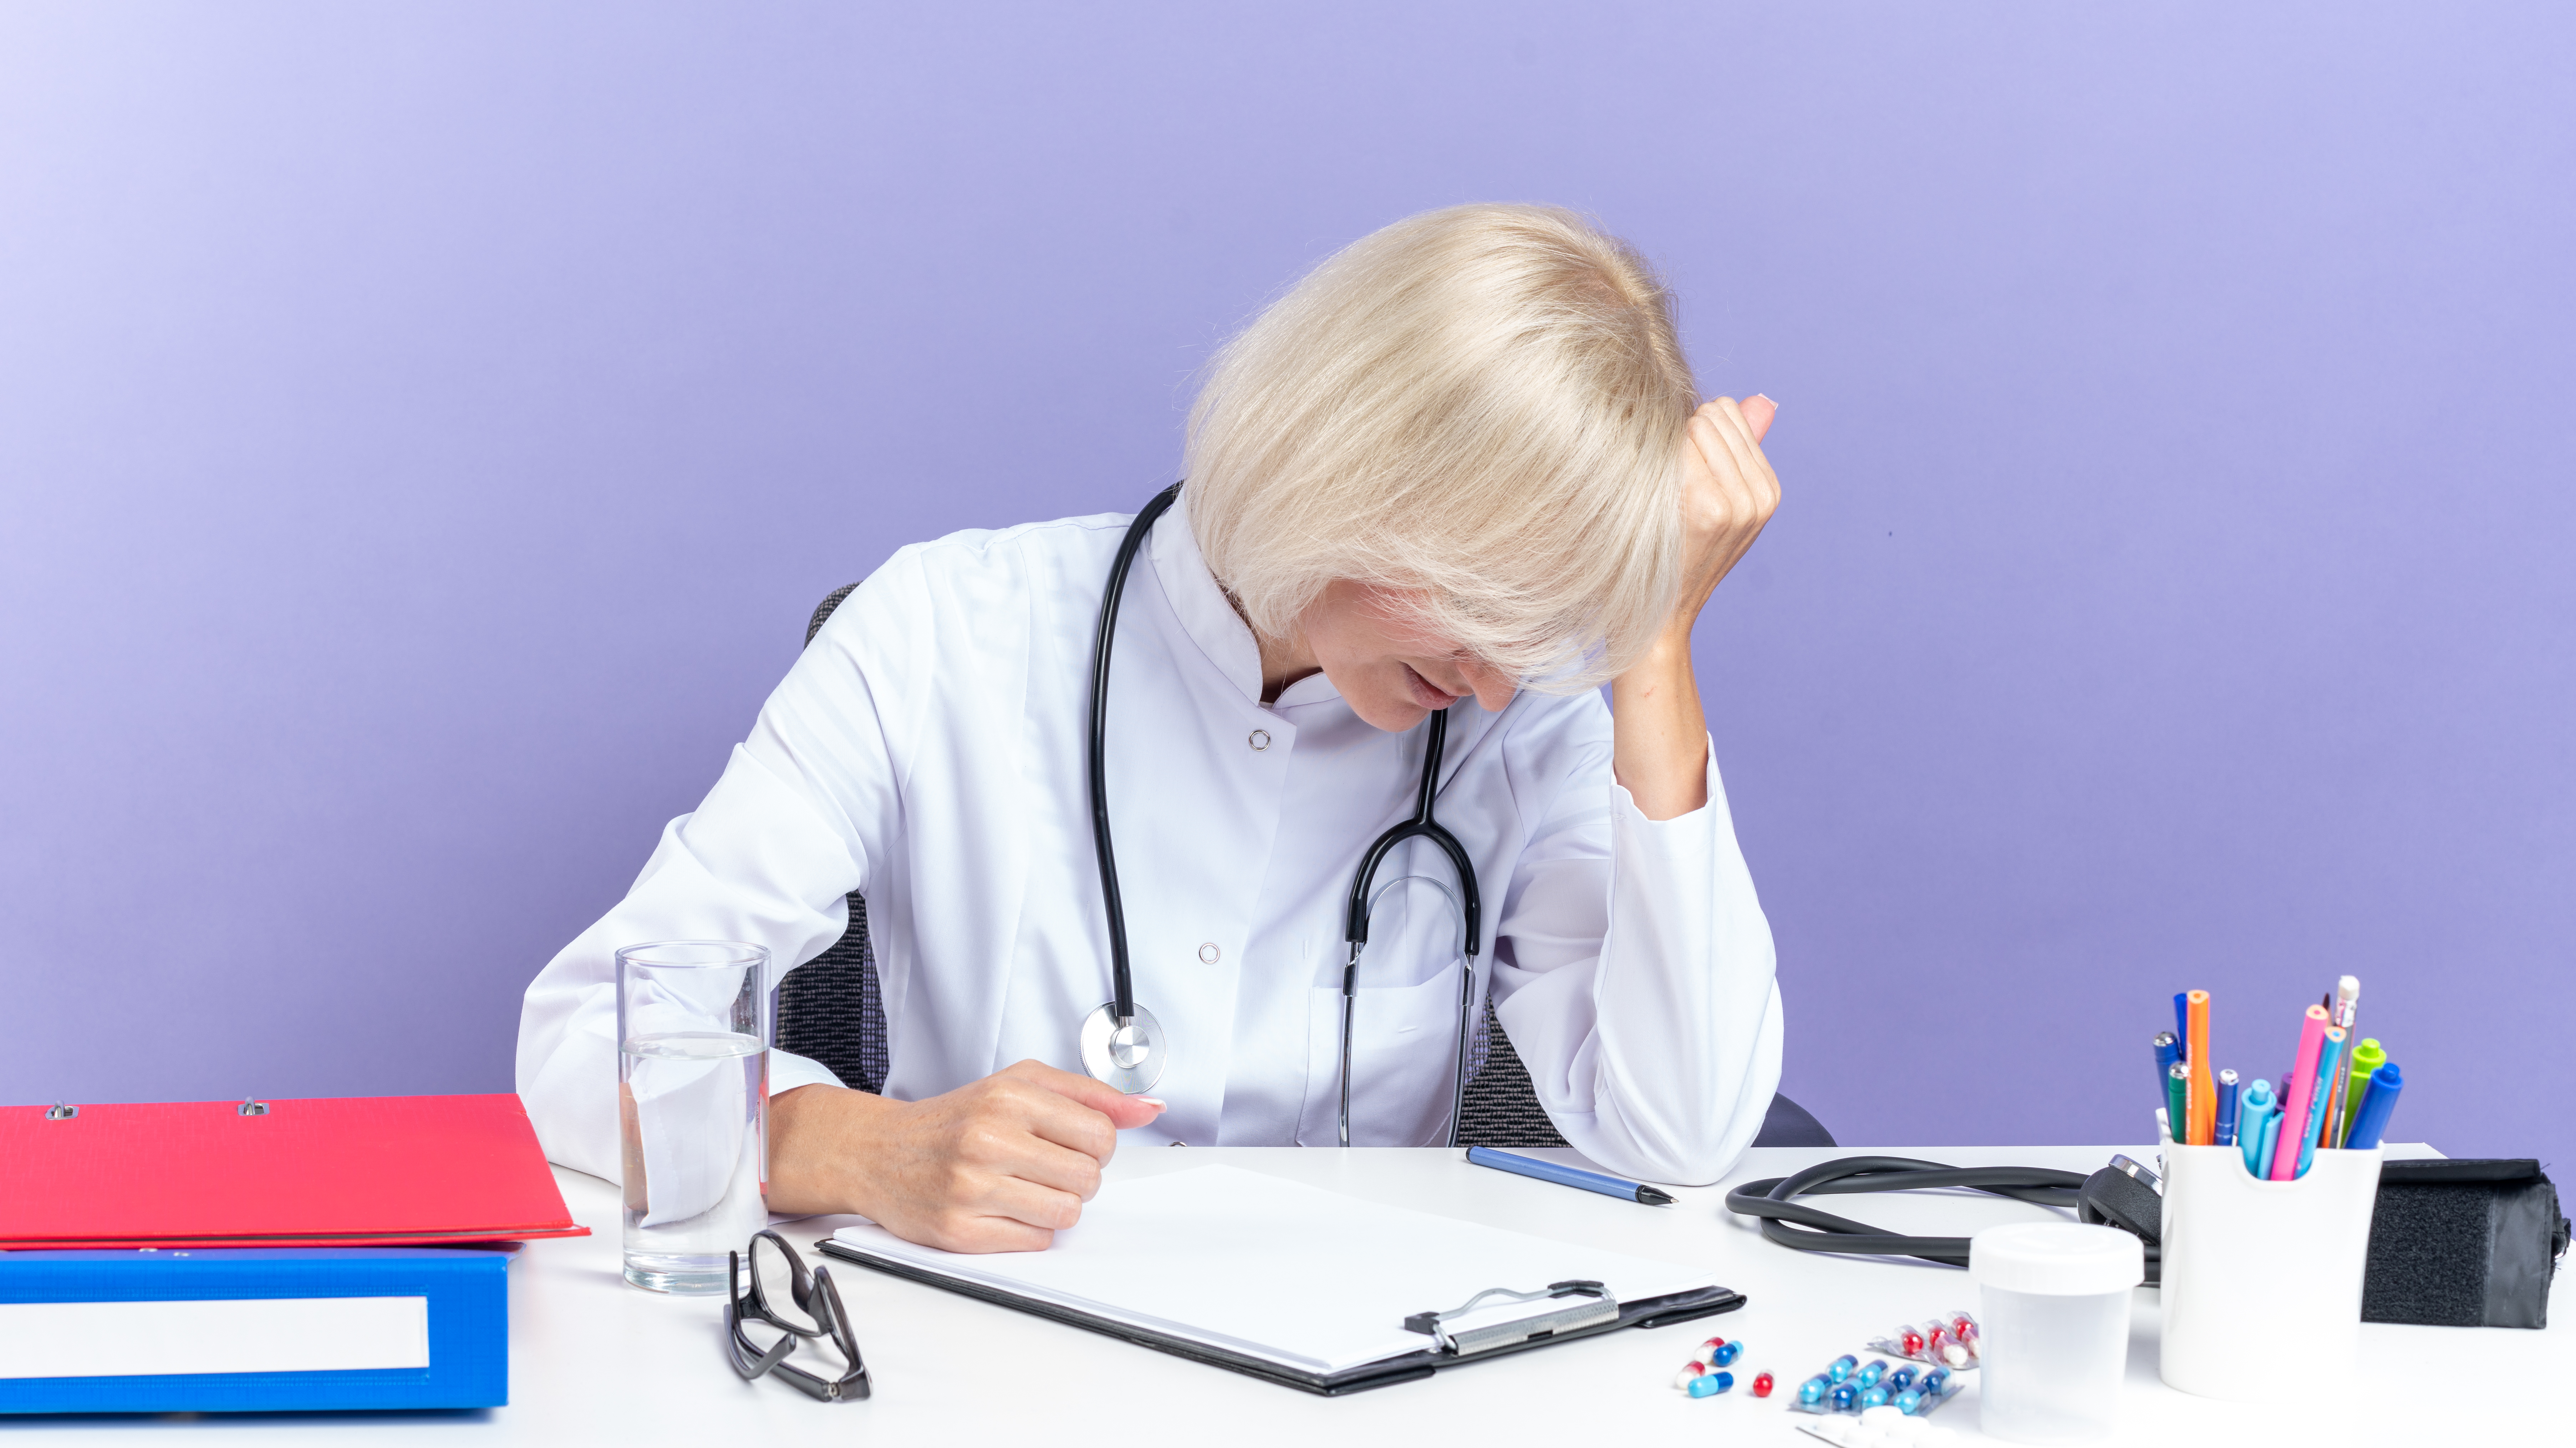 Physician burn out - how automated medical transcription helps